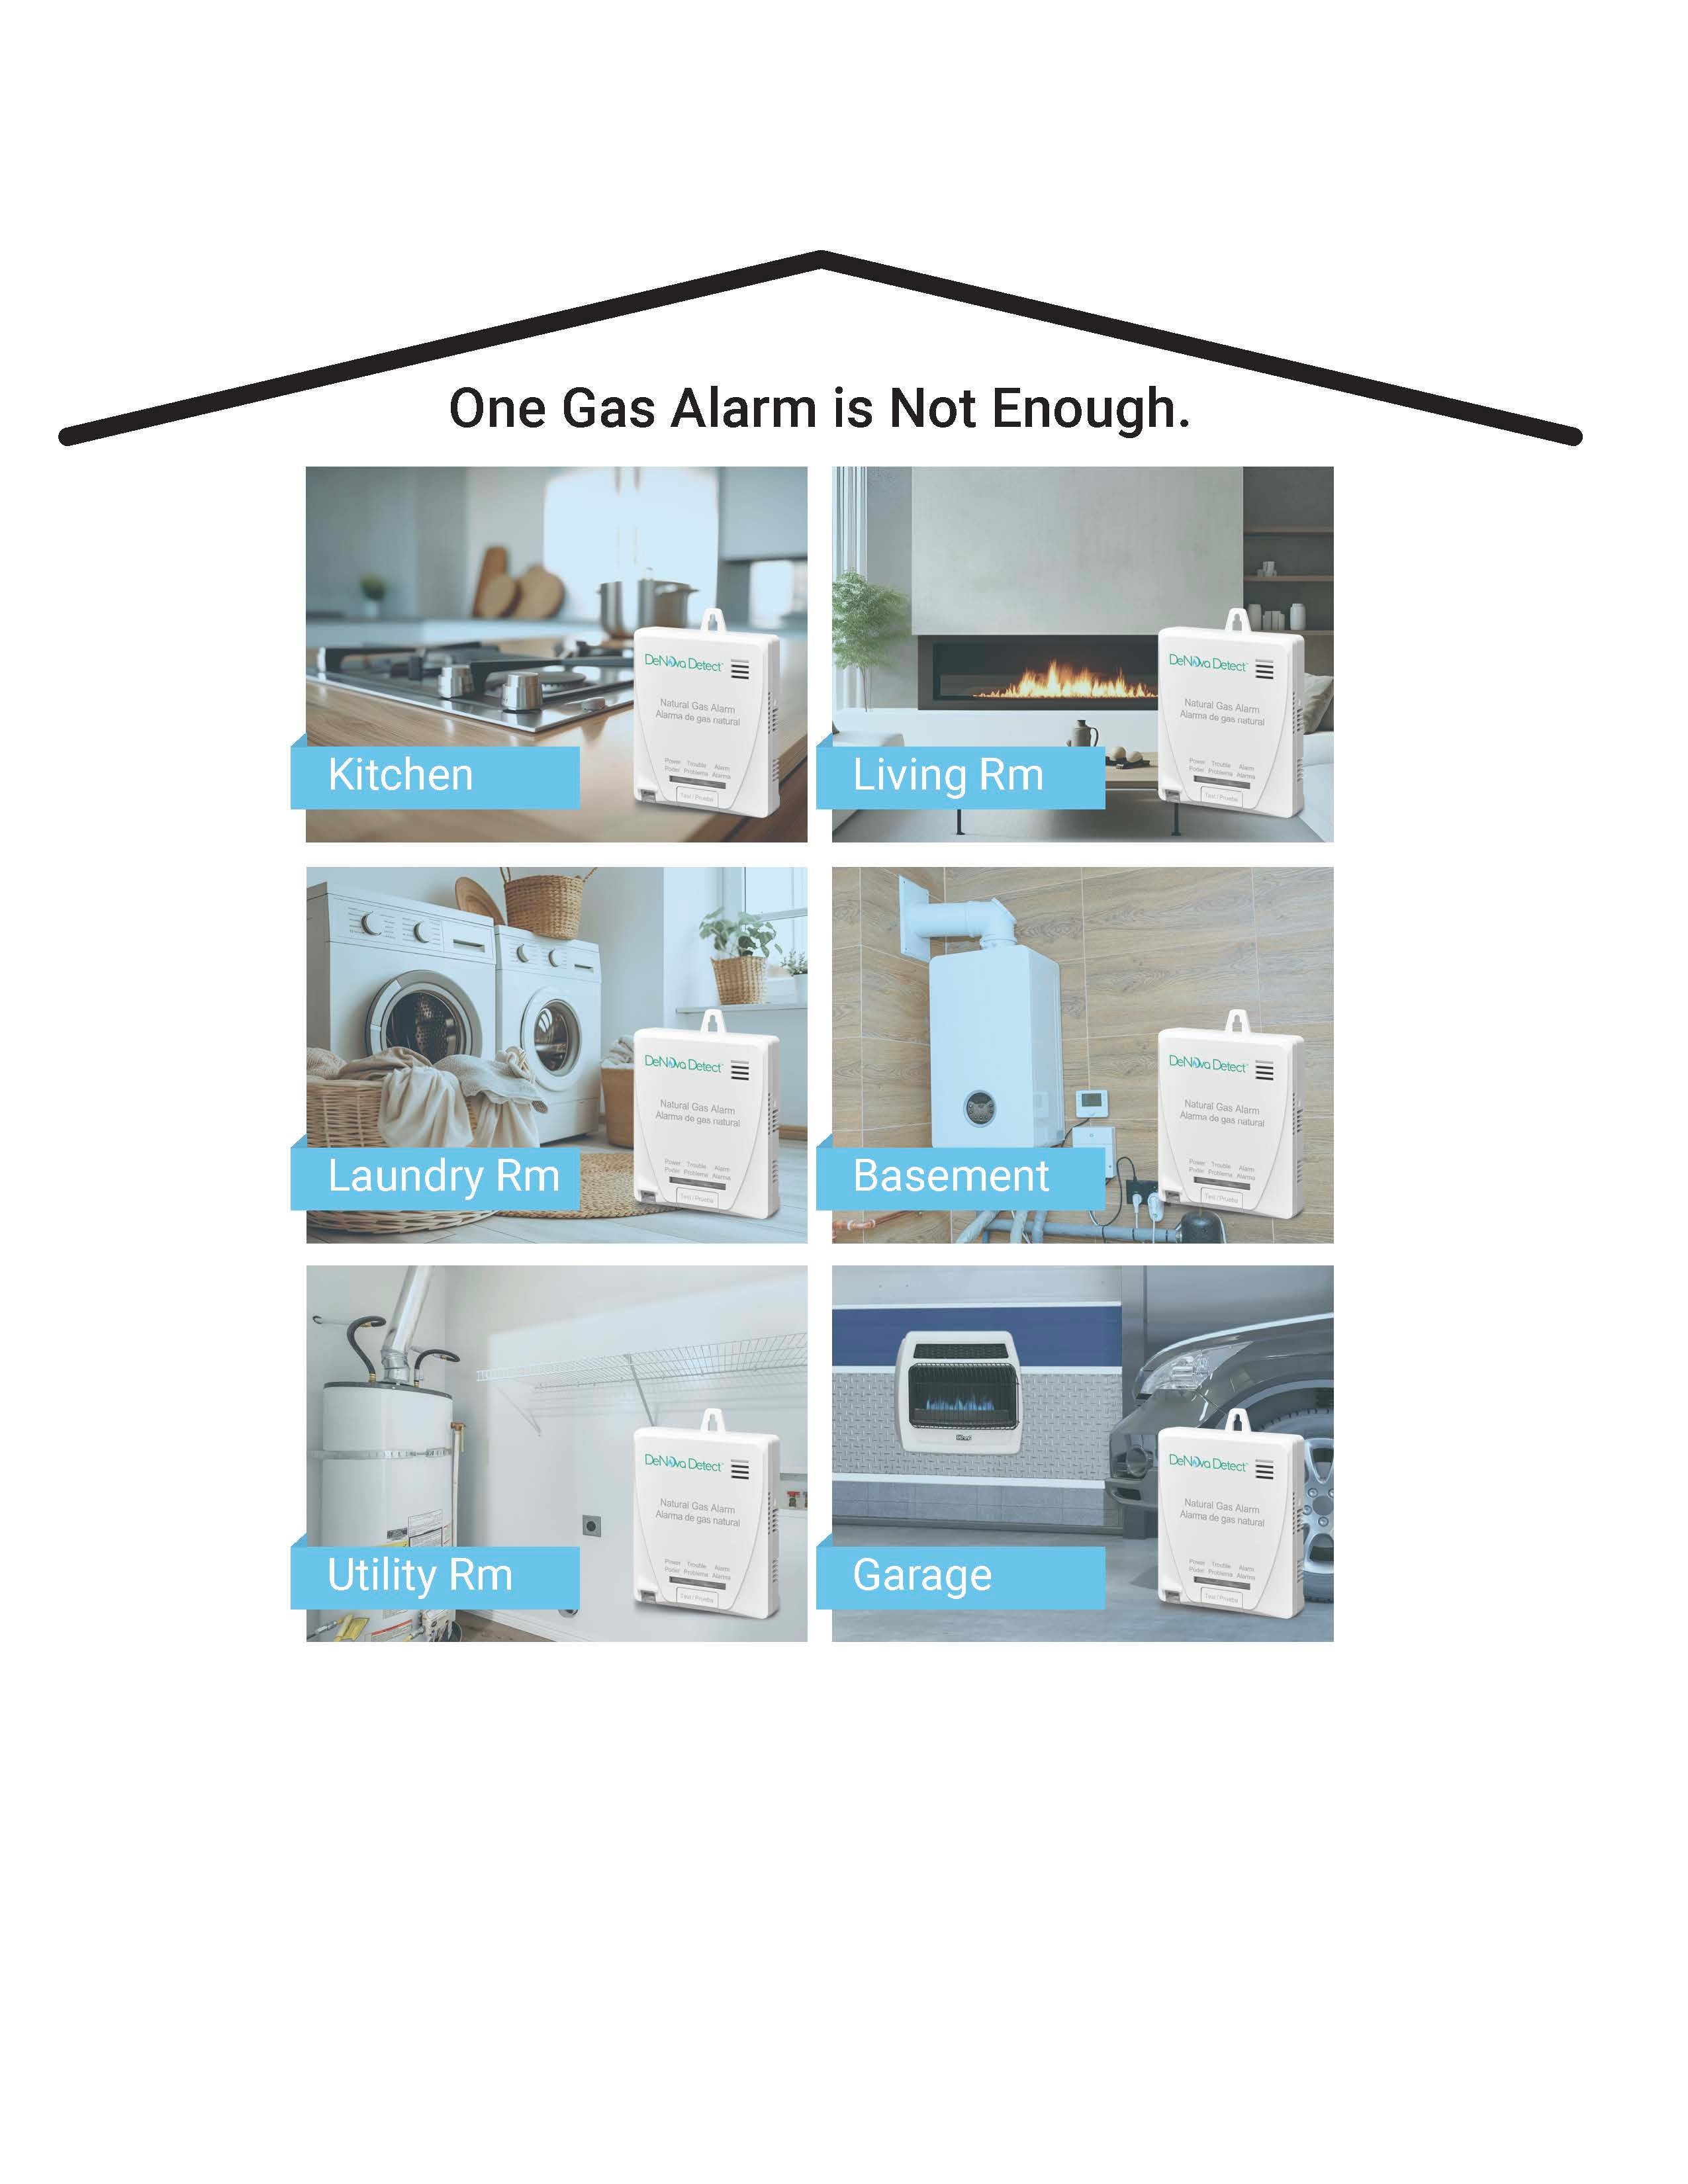 6-Year Battery-Powered Natural Gas Alarm